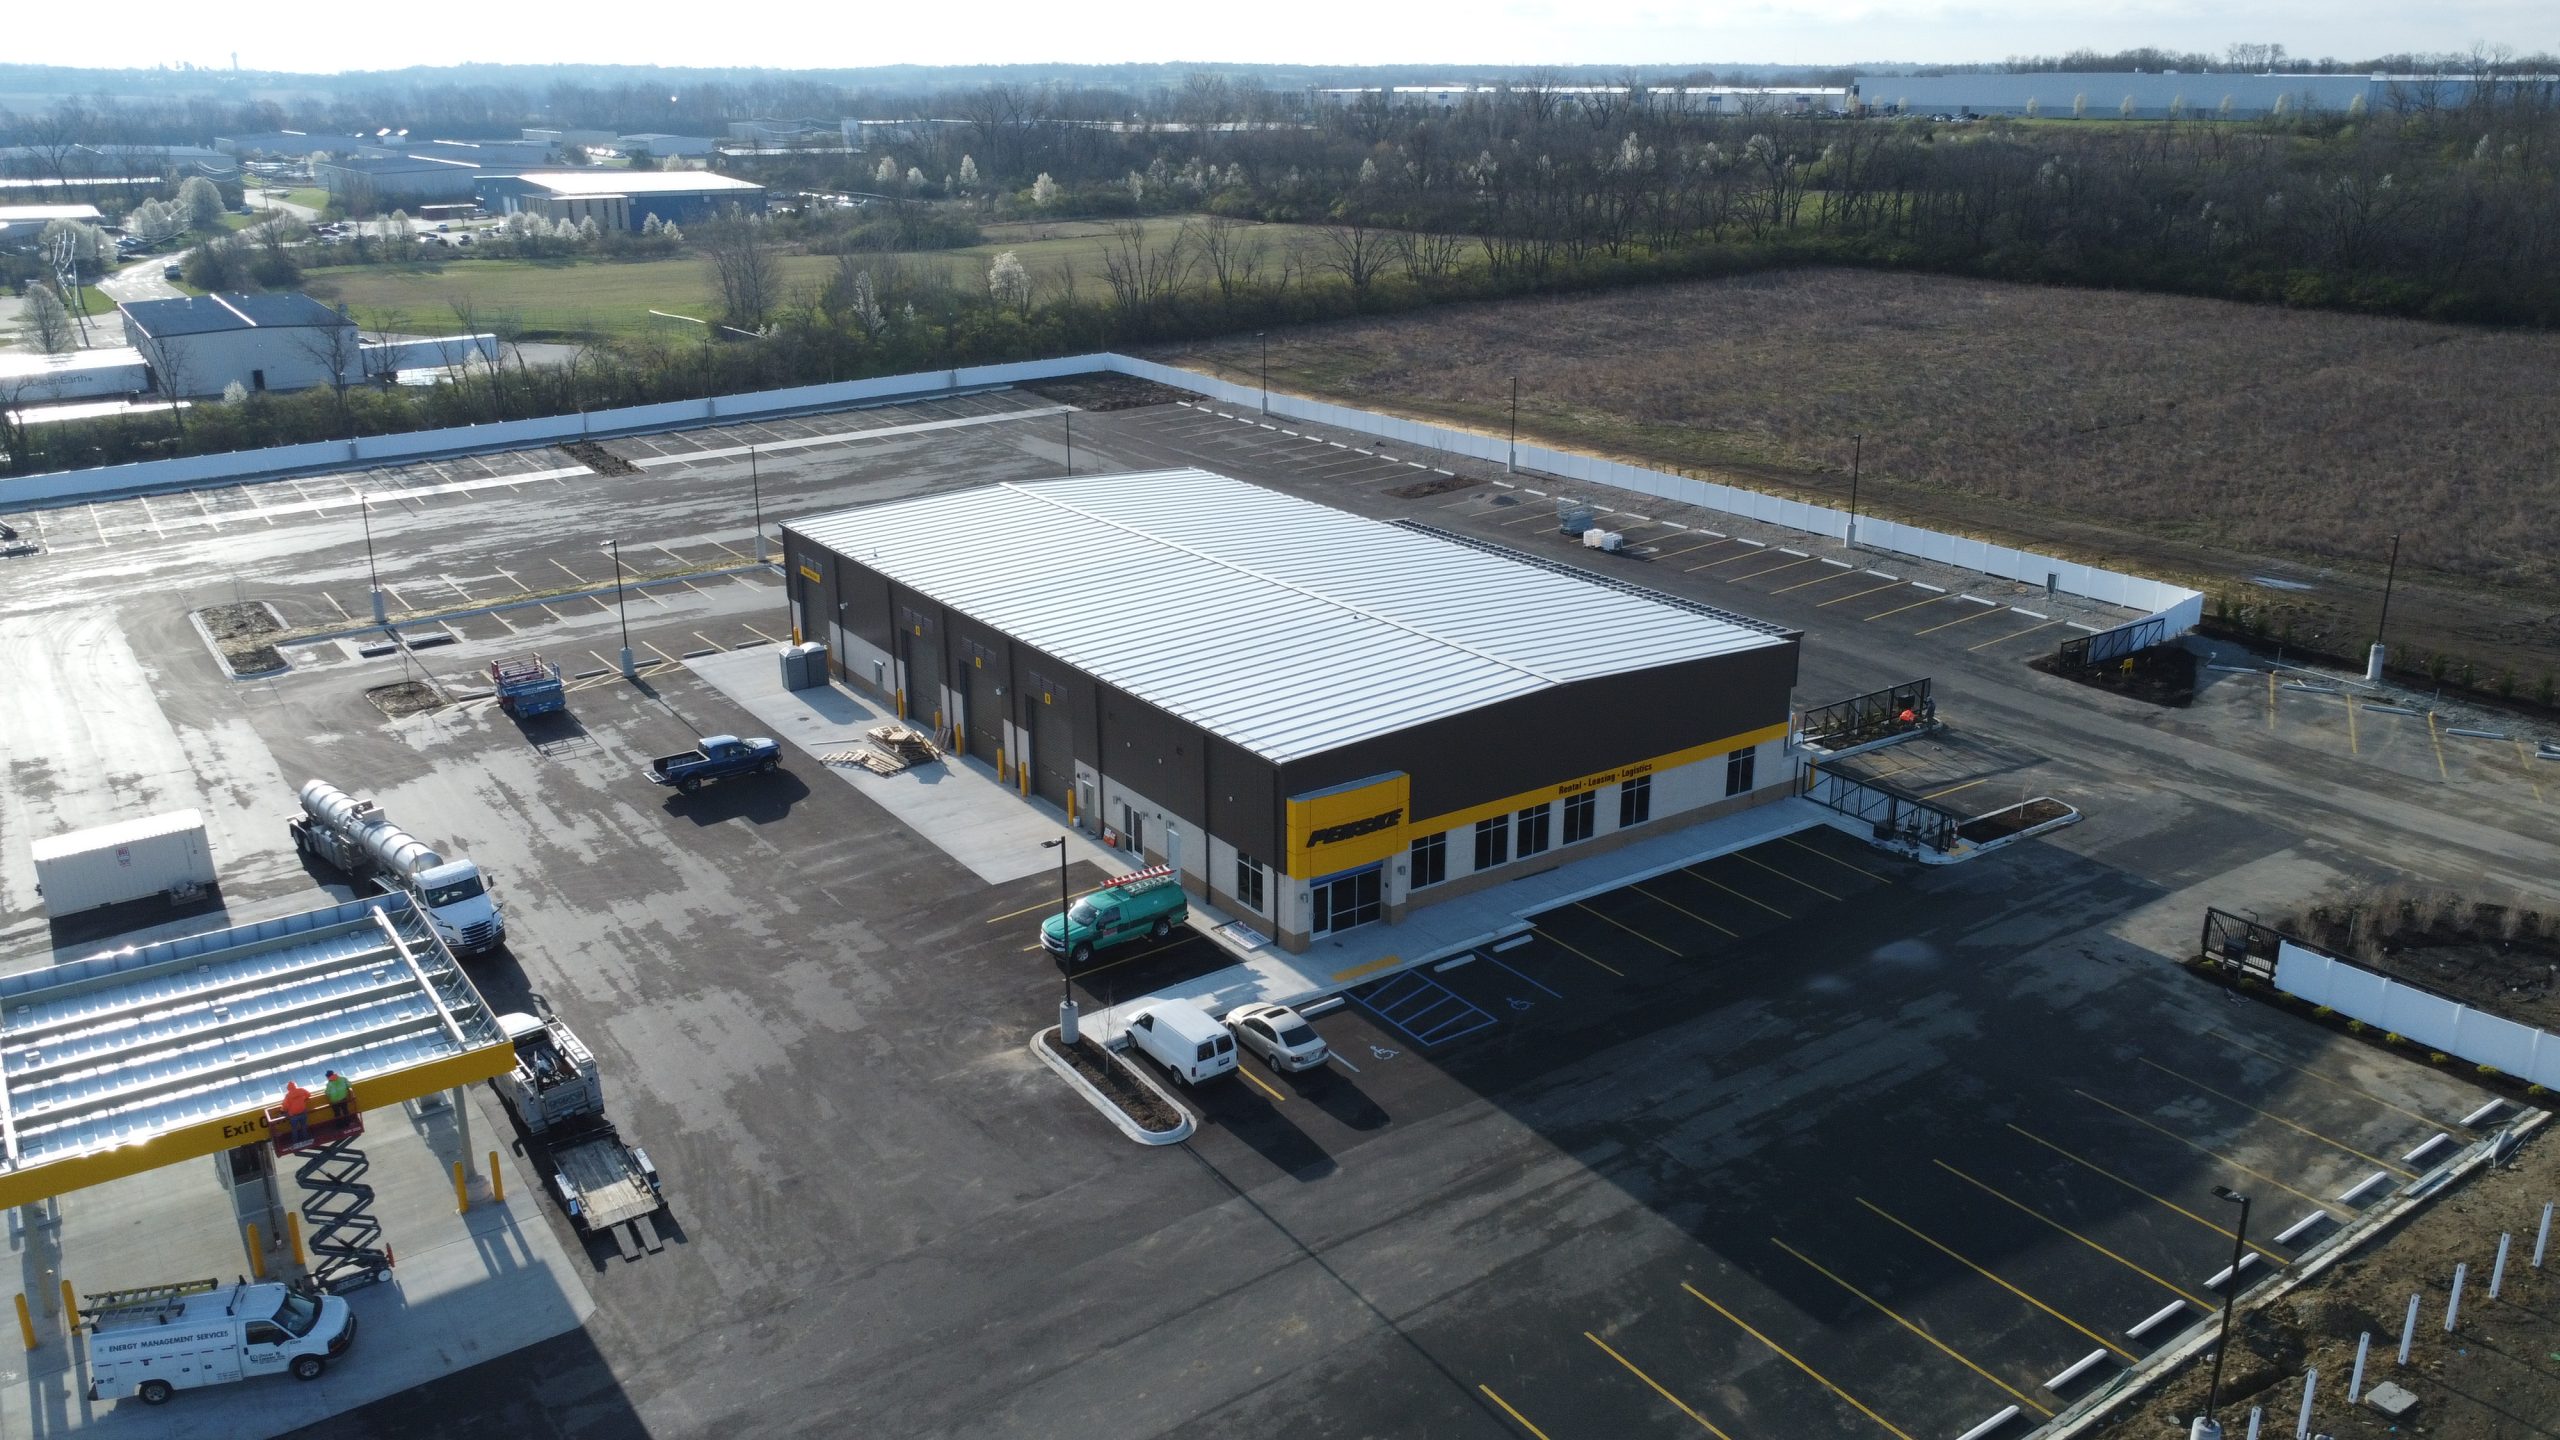 Check out this state of the art building at Penske Monroe!